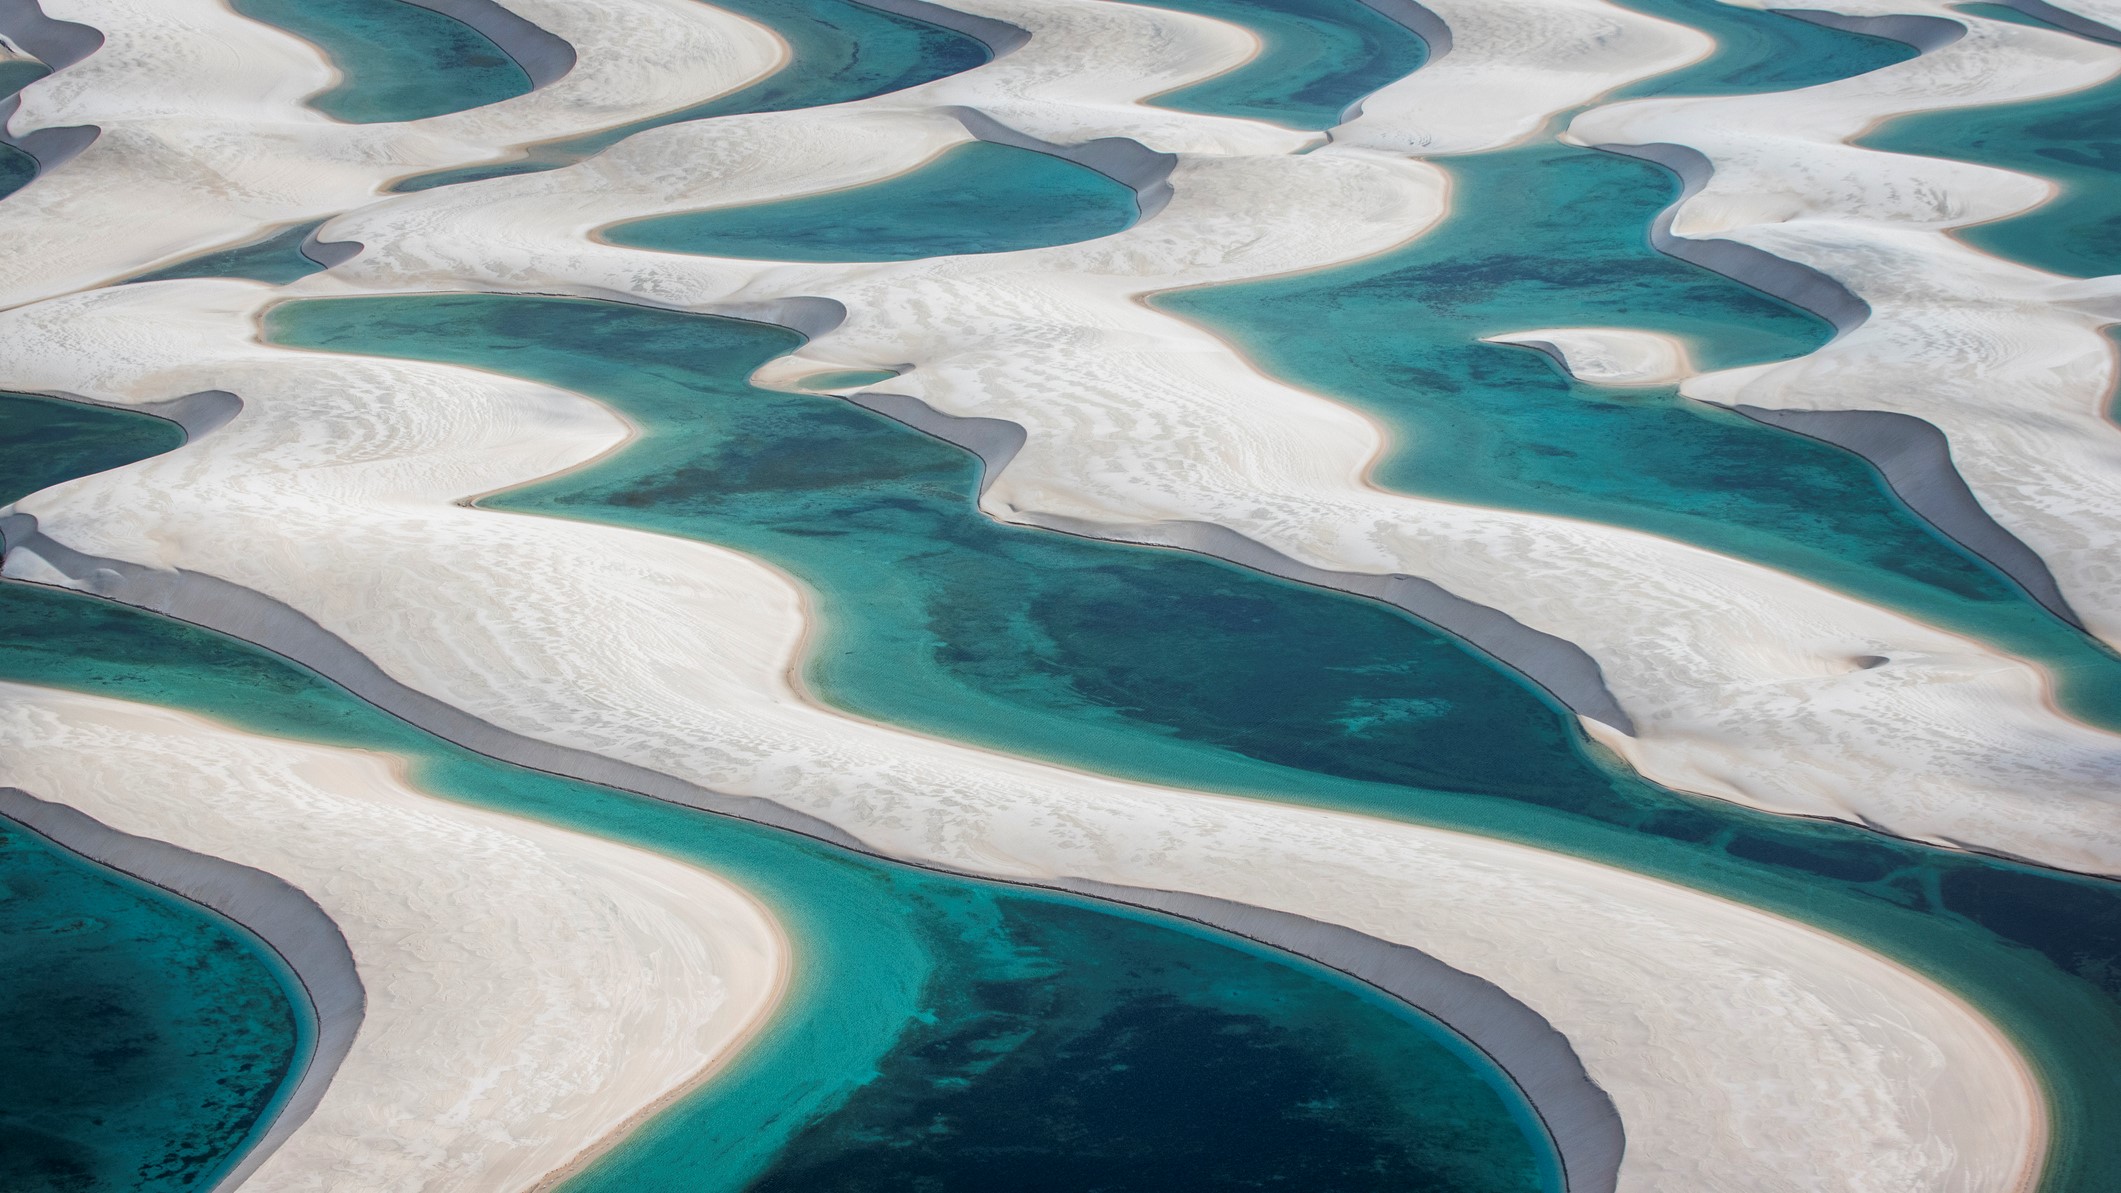 Aerial view of white sand dunes separated by blue pools of water.